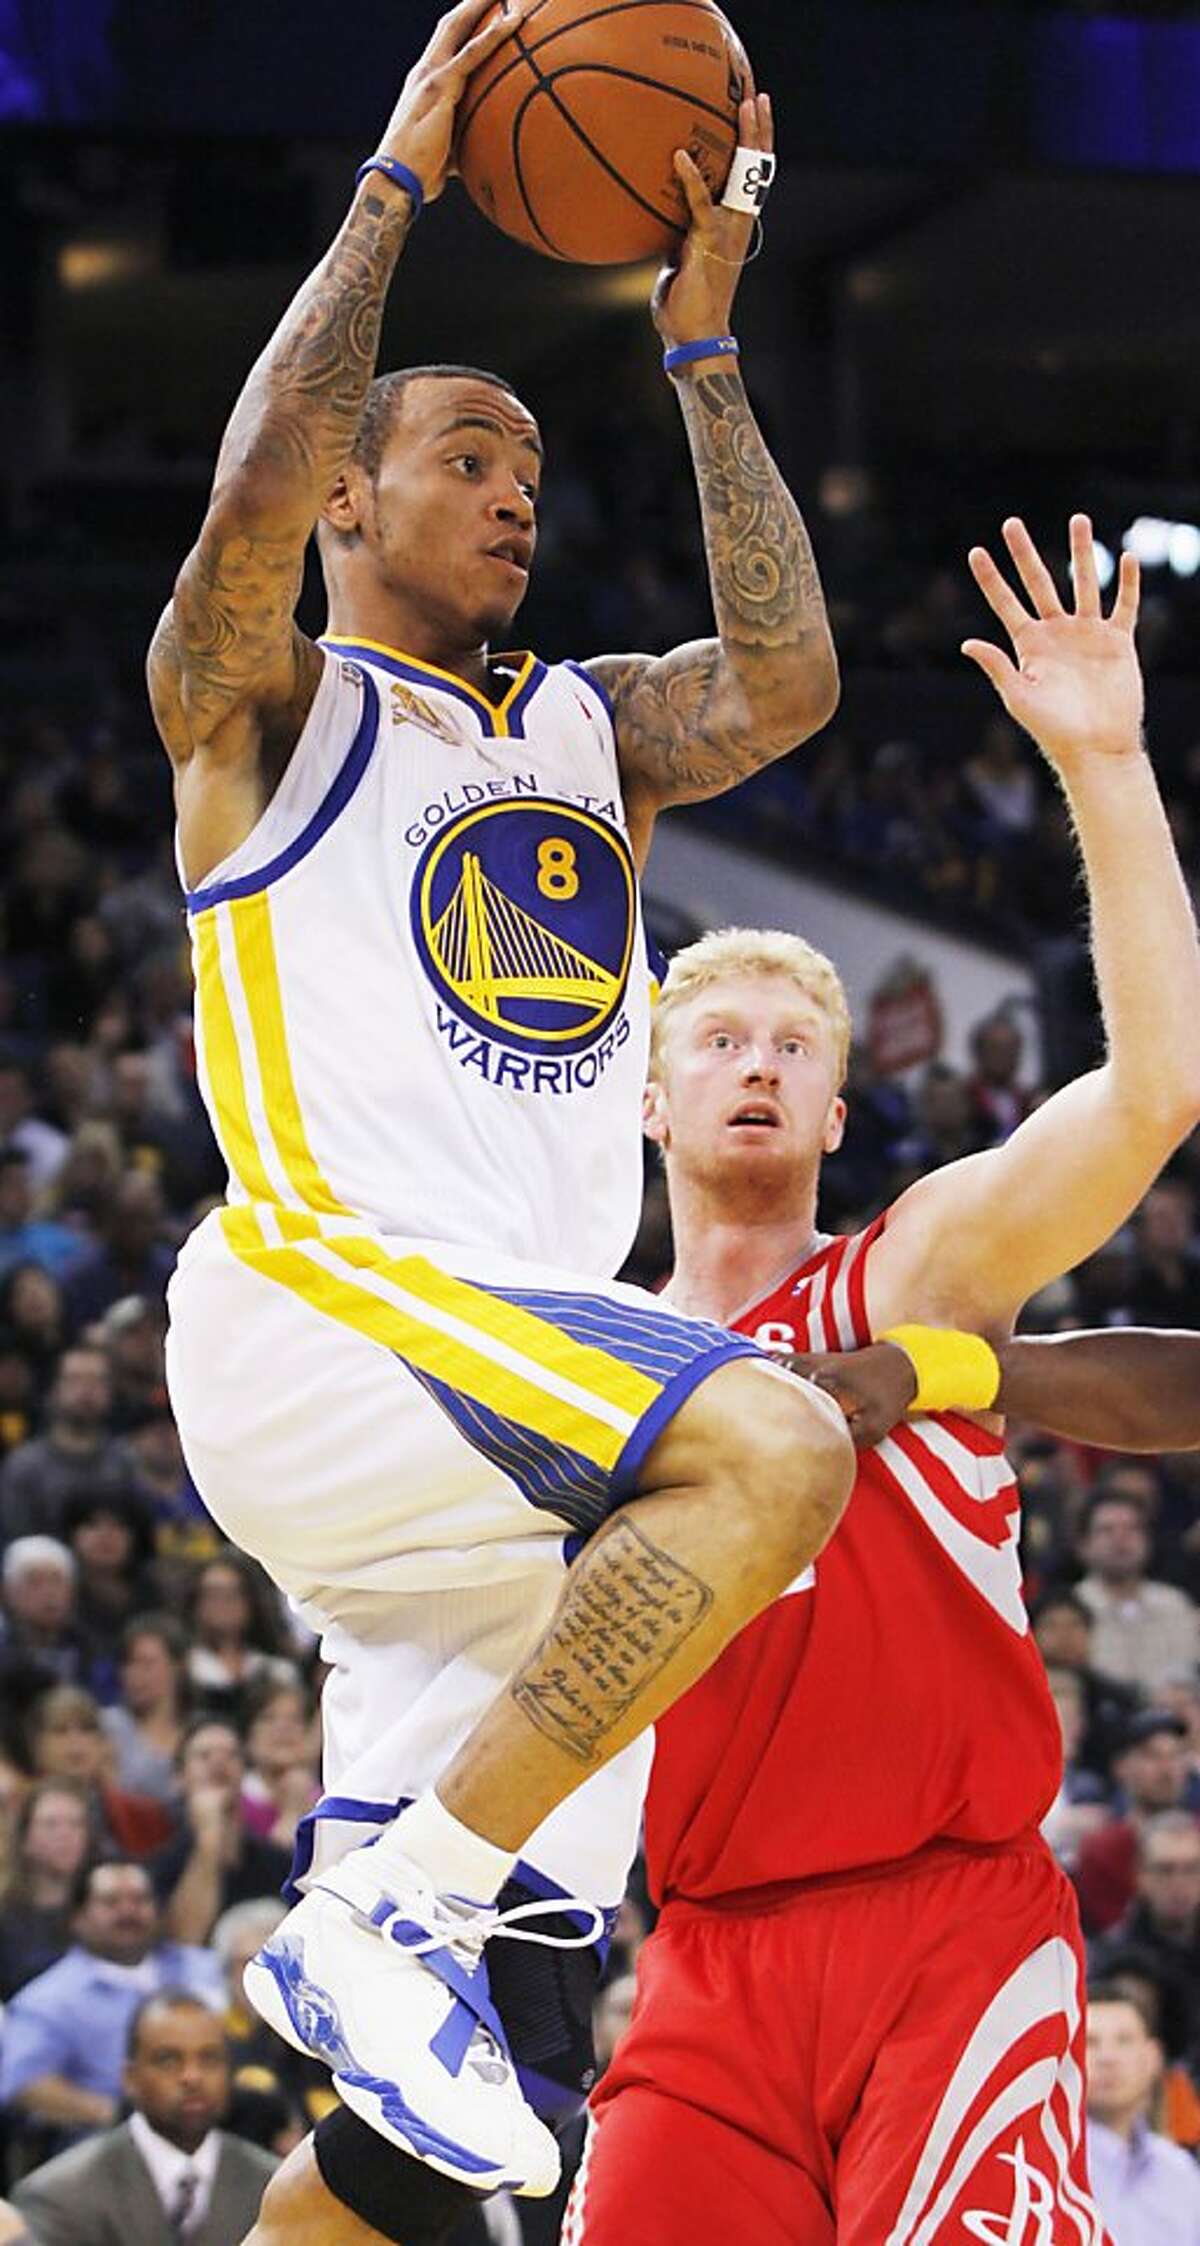 Golden State Warriors' Monta Ellis (8) heads past Houston Rockets' Chase Budinger, during the first half of an NBA basketball game, Sunday, Feb. 12, 2012, in Oakland, Calif. (AP Photo/George Nikitin)